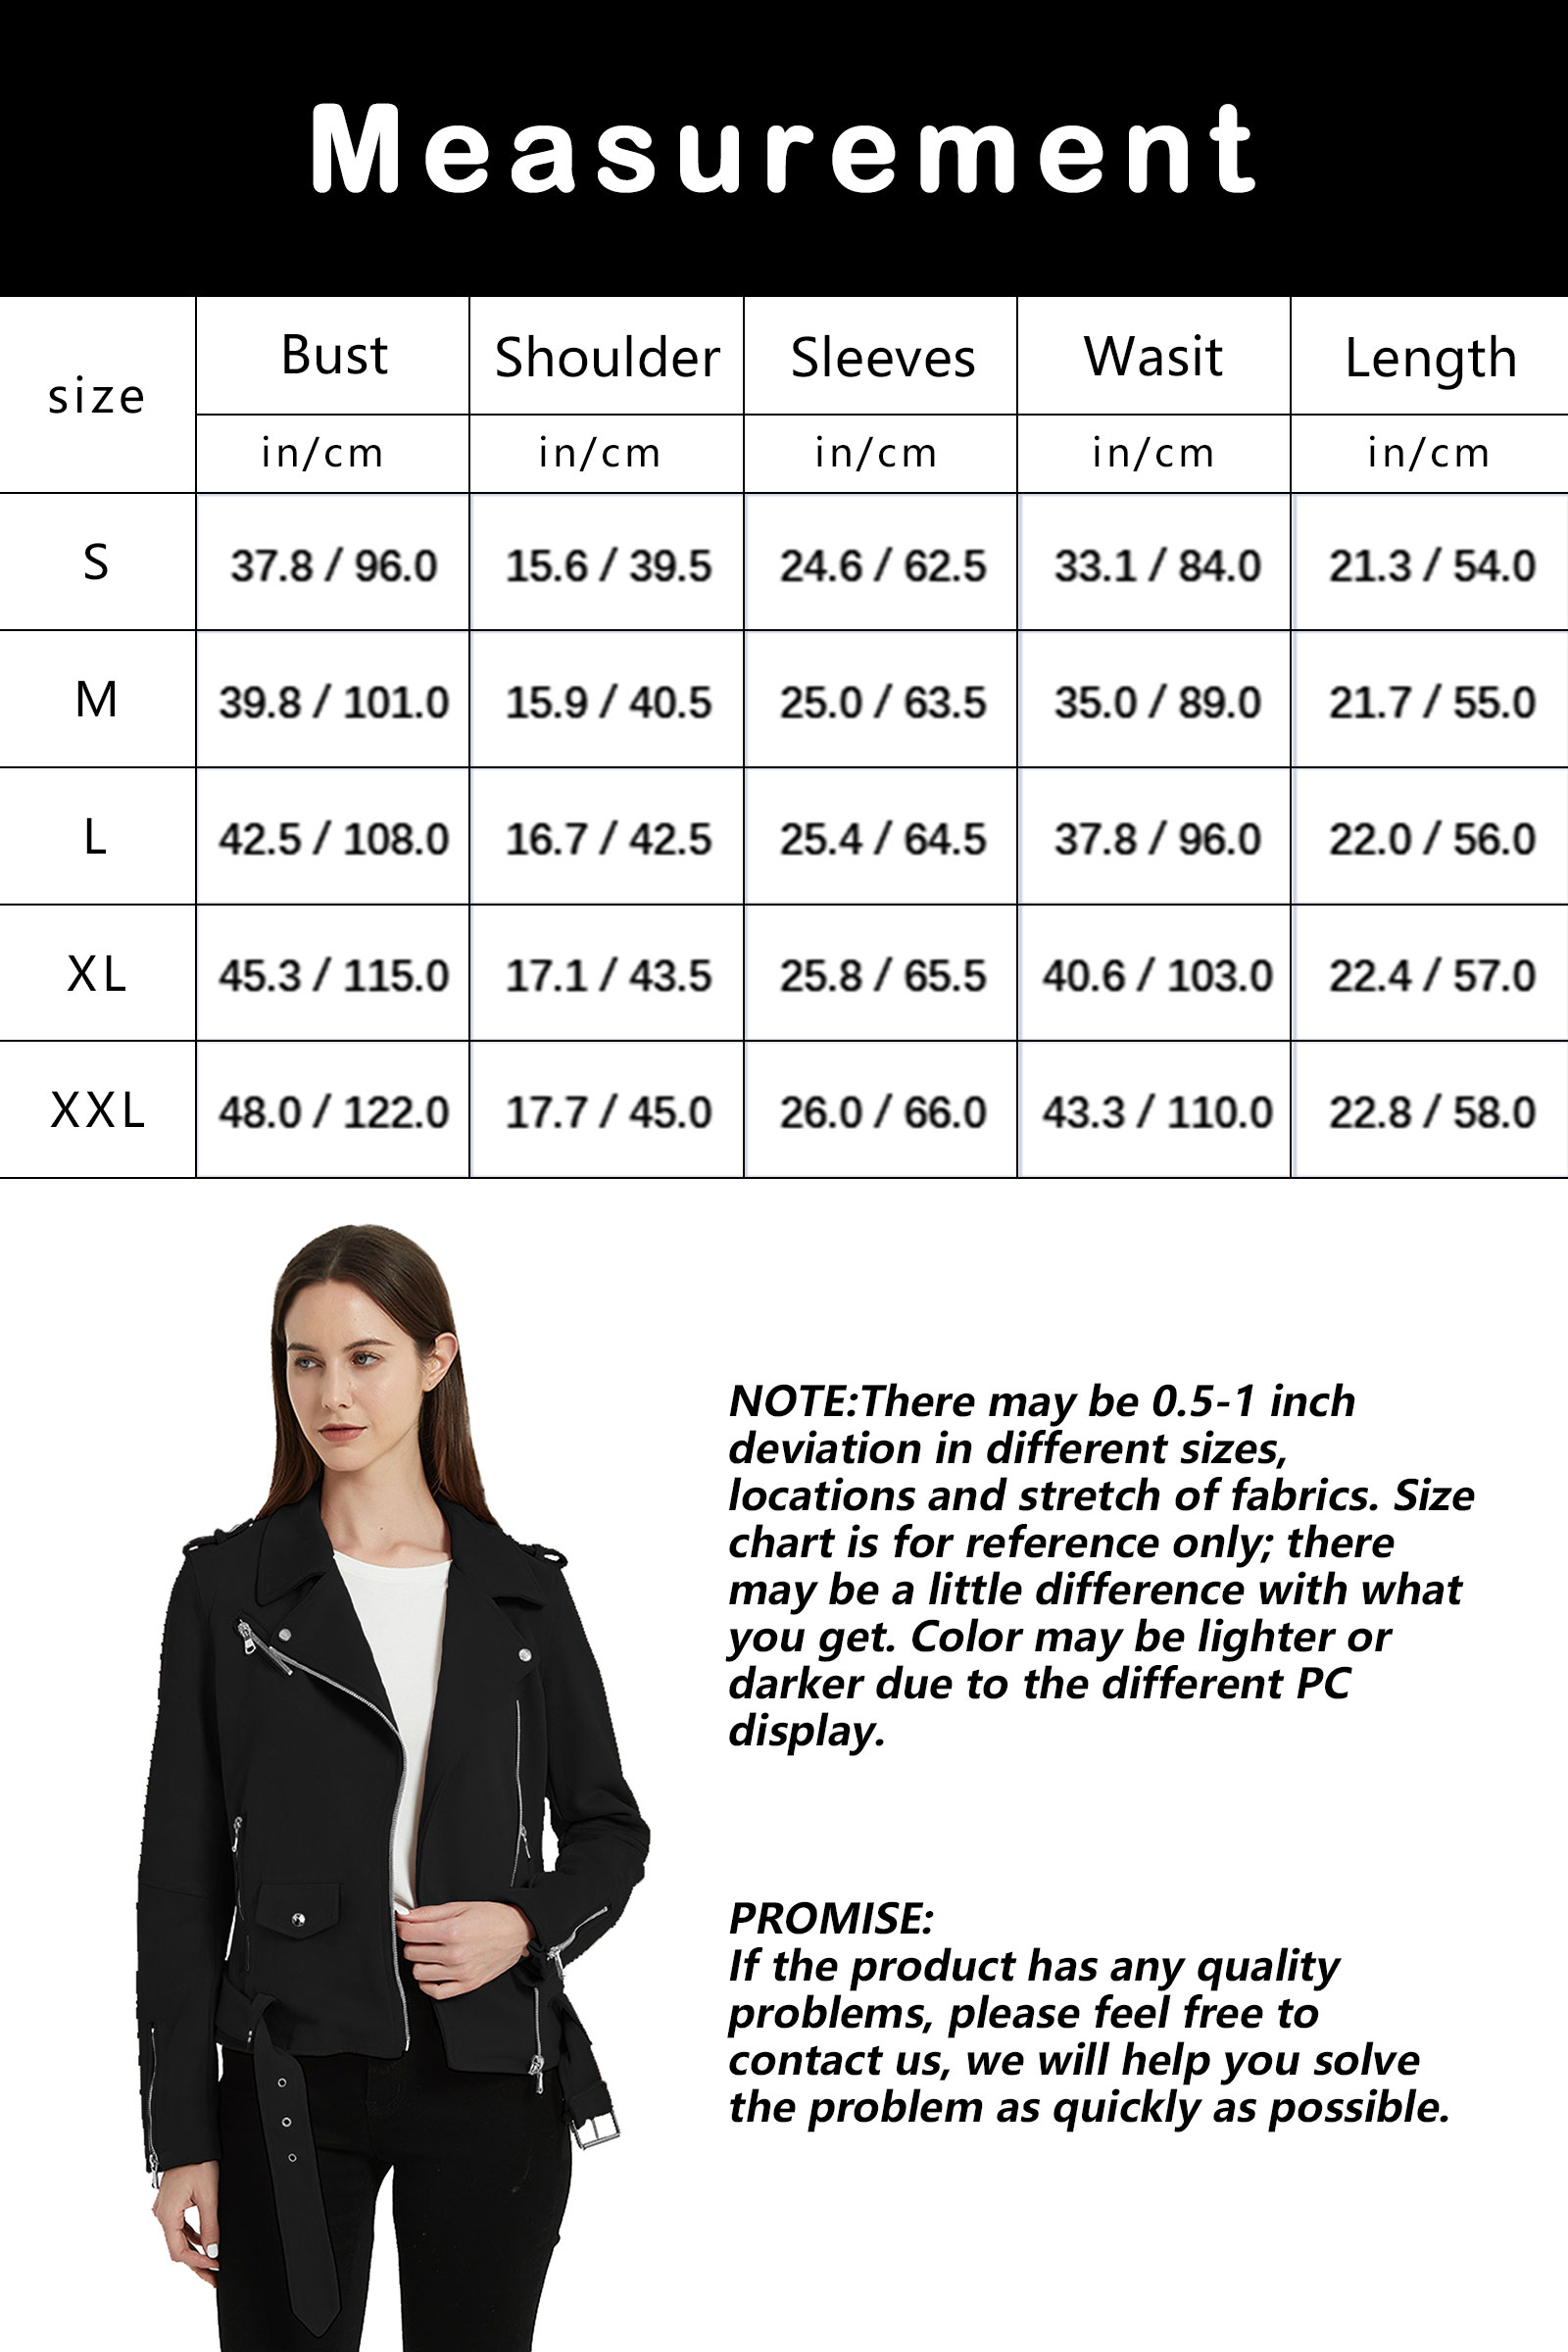 Giolshon Women's Faux Suede Leather Jacket, Motorcycle Short PU Coat Moto Biker Fitted Slim Outwear with Belt - image 5 of 8